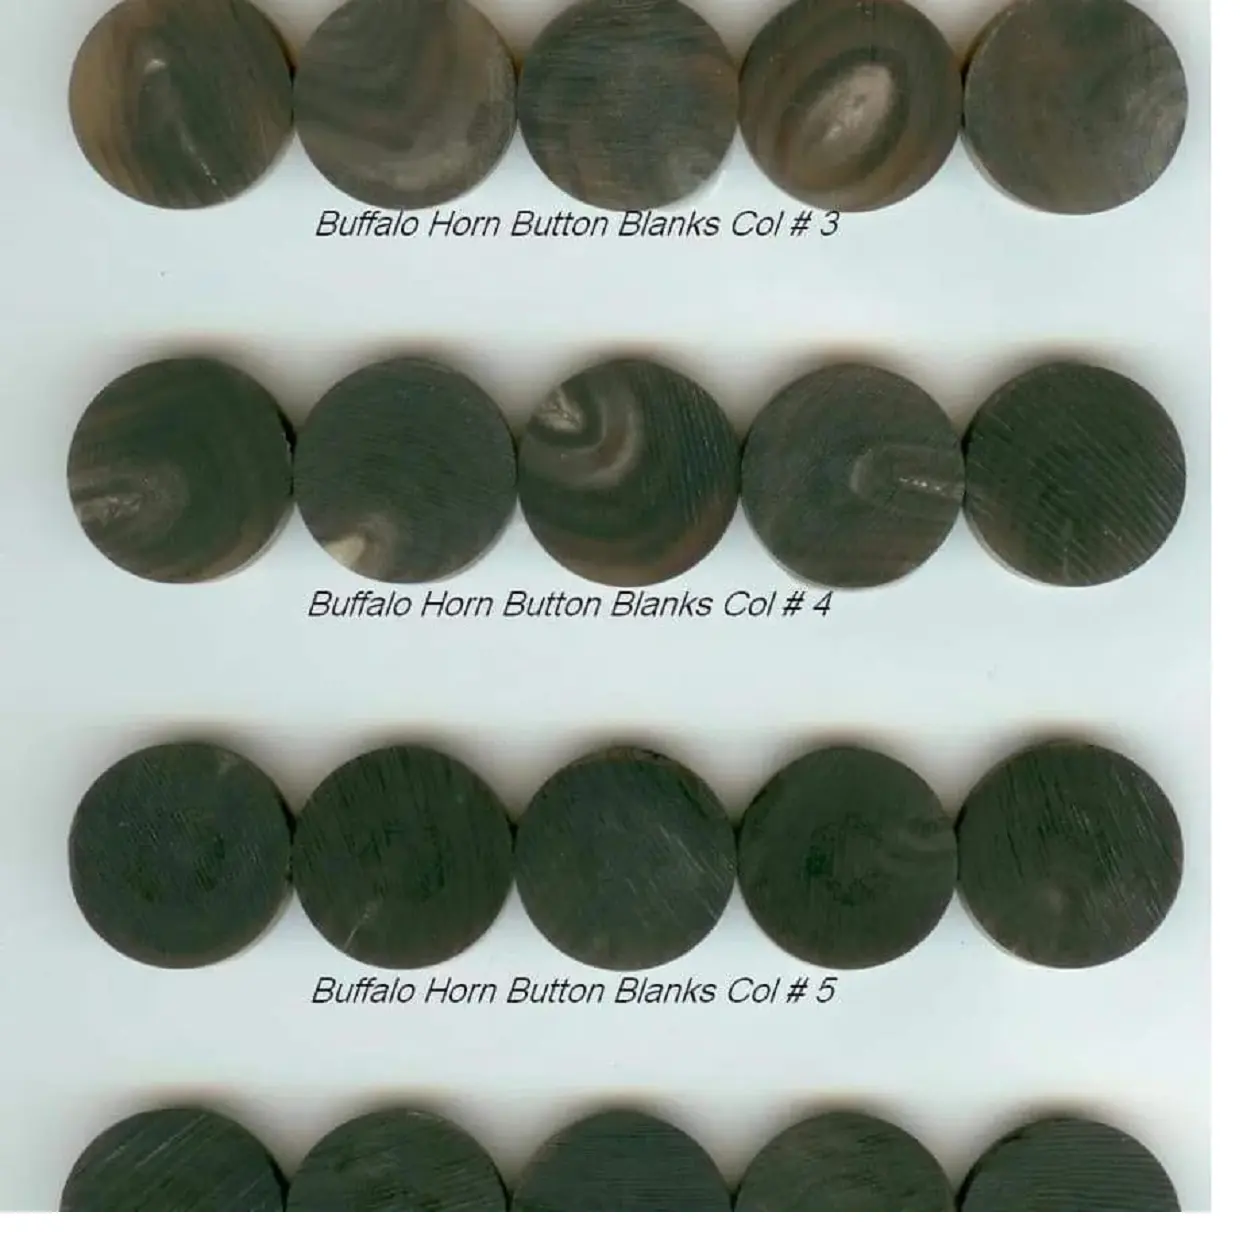 Custom made natural buffalo horn blanks suitable for horn button makers and ideal for resale to bead supply stores